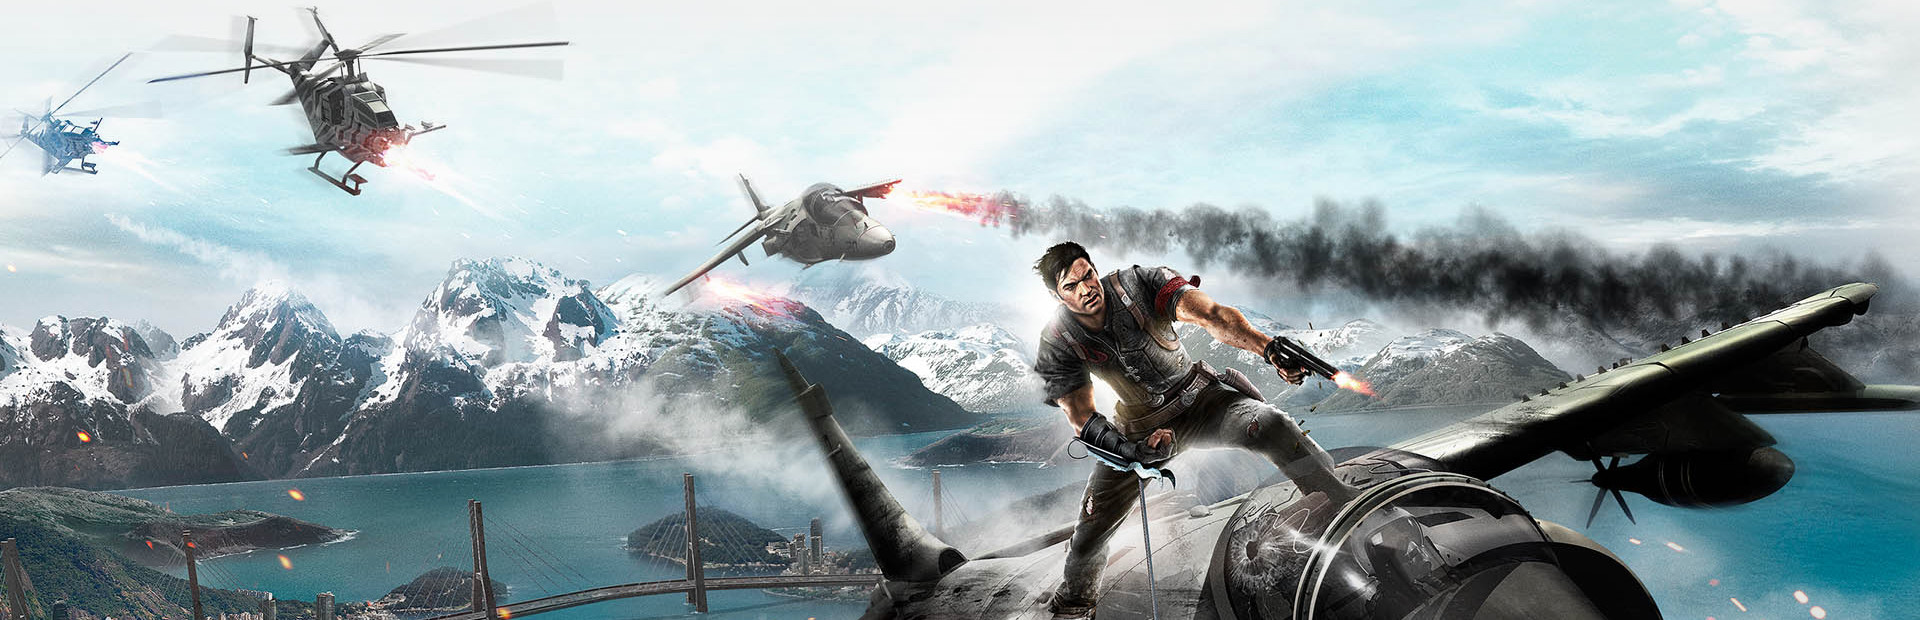 Just Cause 2 cover image